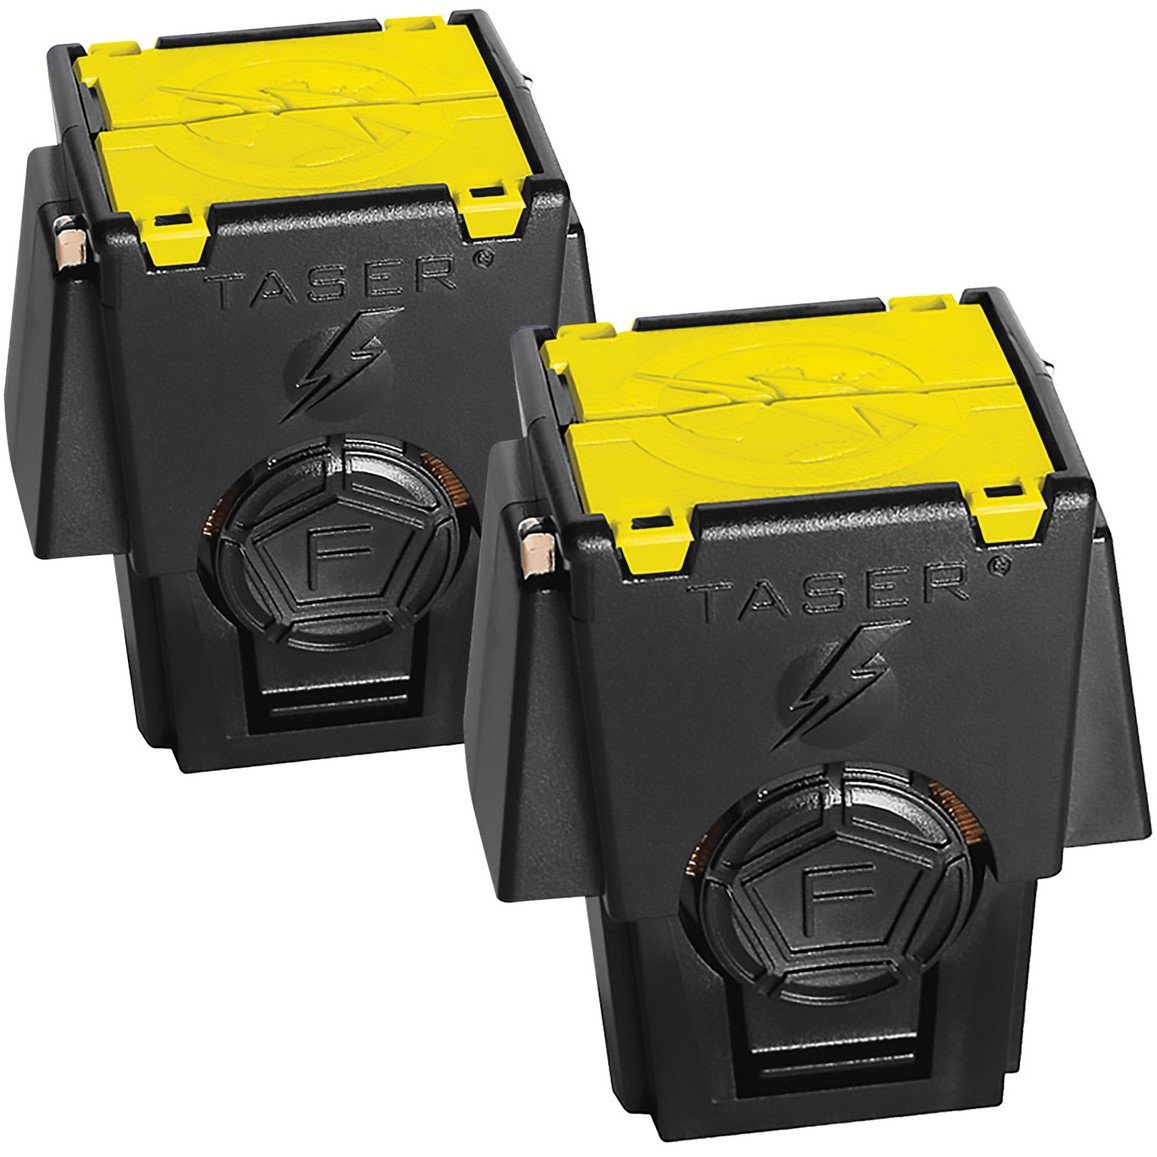 After Purchase Offer - Taser X26C - Collection